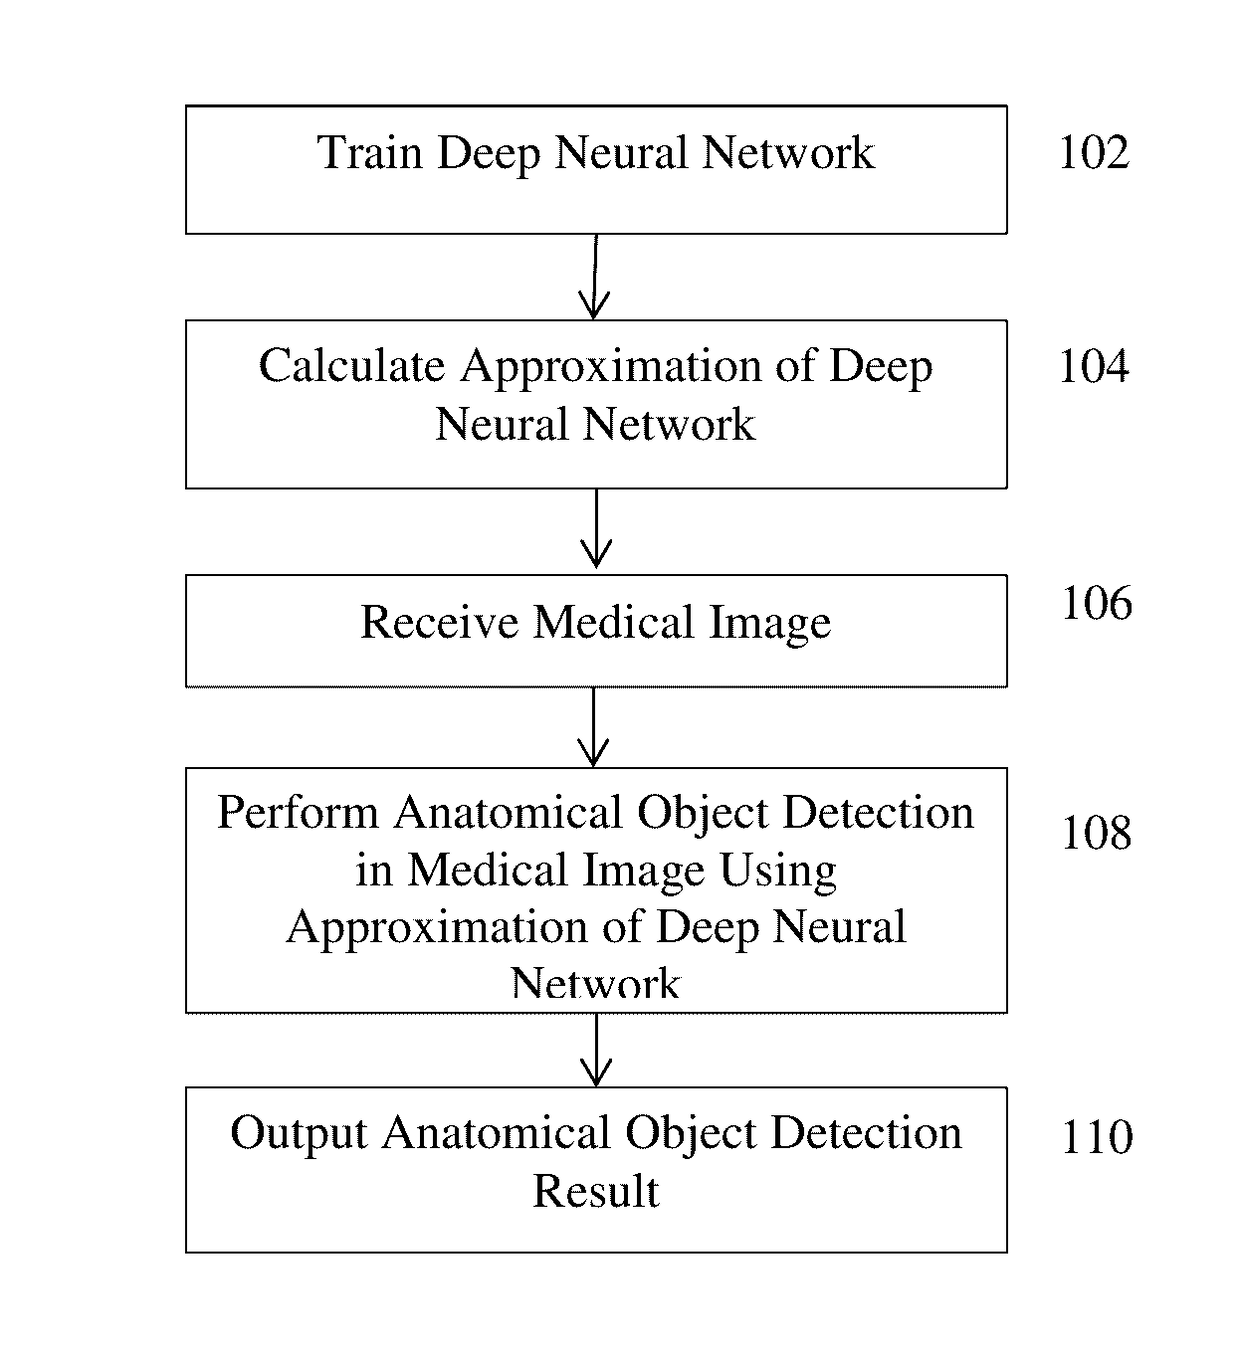 Method and system for approximating deep neural networks for anatomical object detection